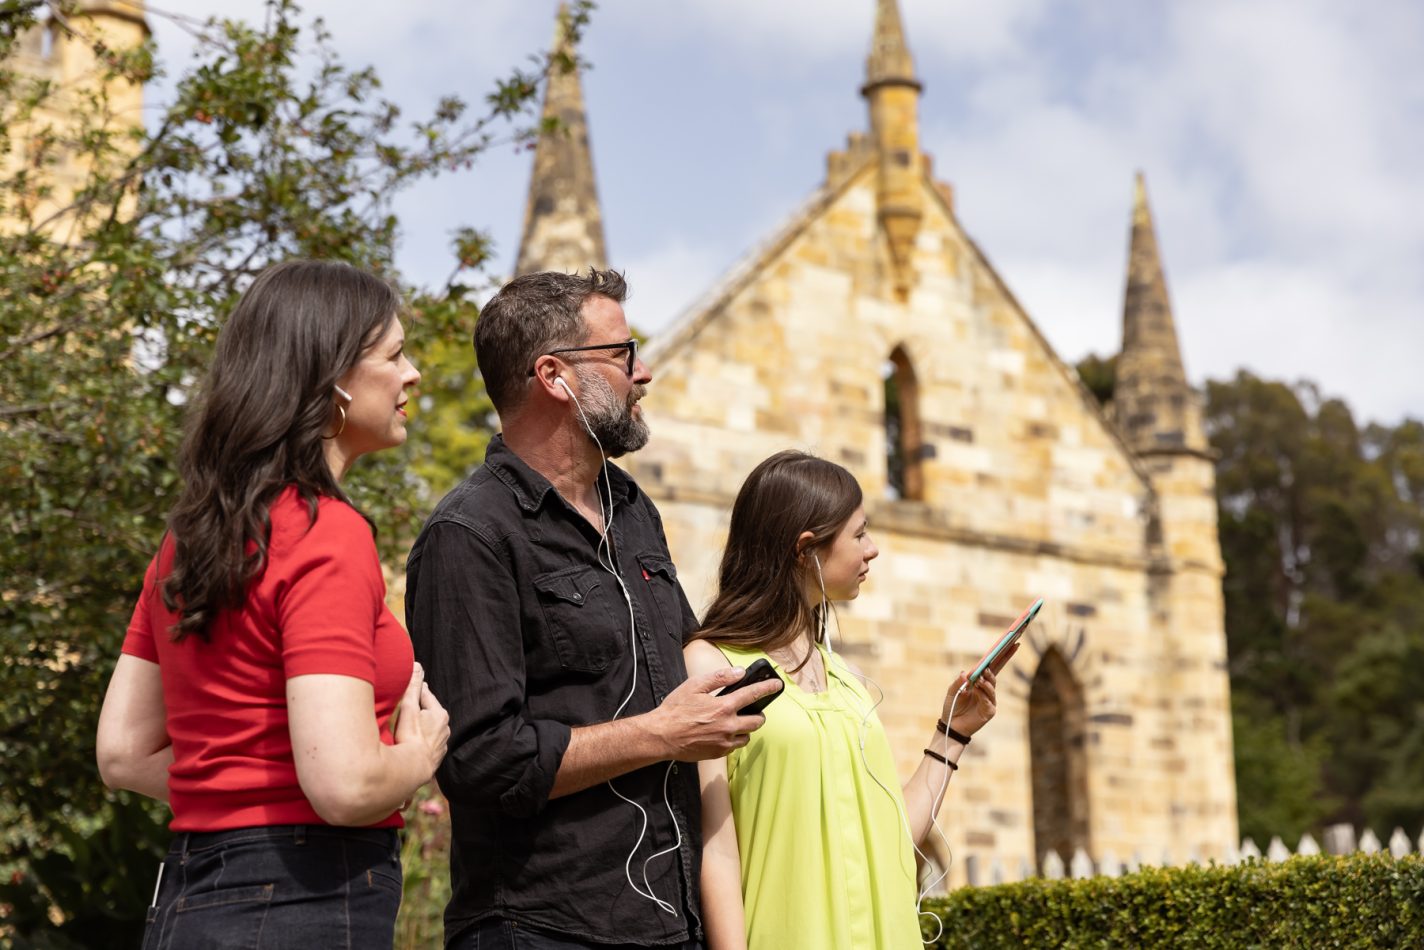 A mother, father and daughter listen to the audio experience on their phones with earbuds in front of the Port Arthur Church